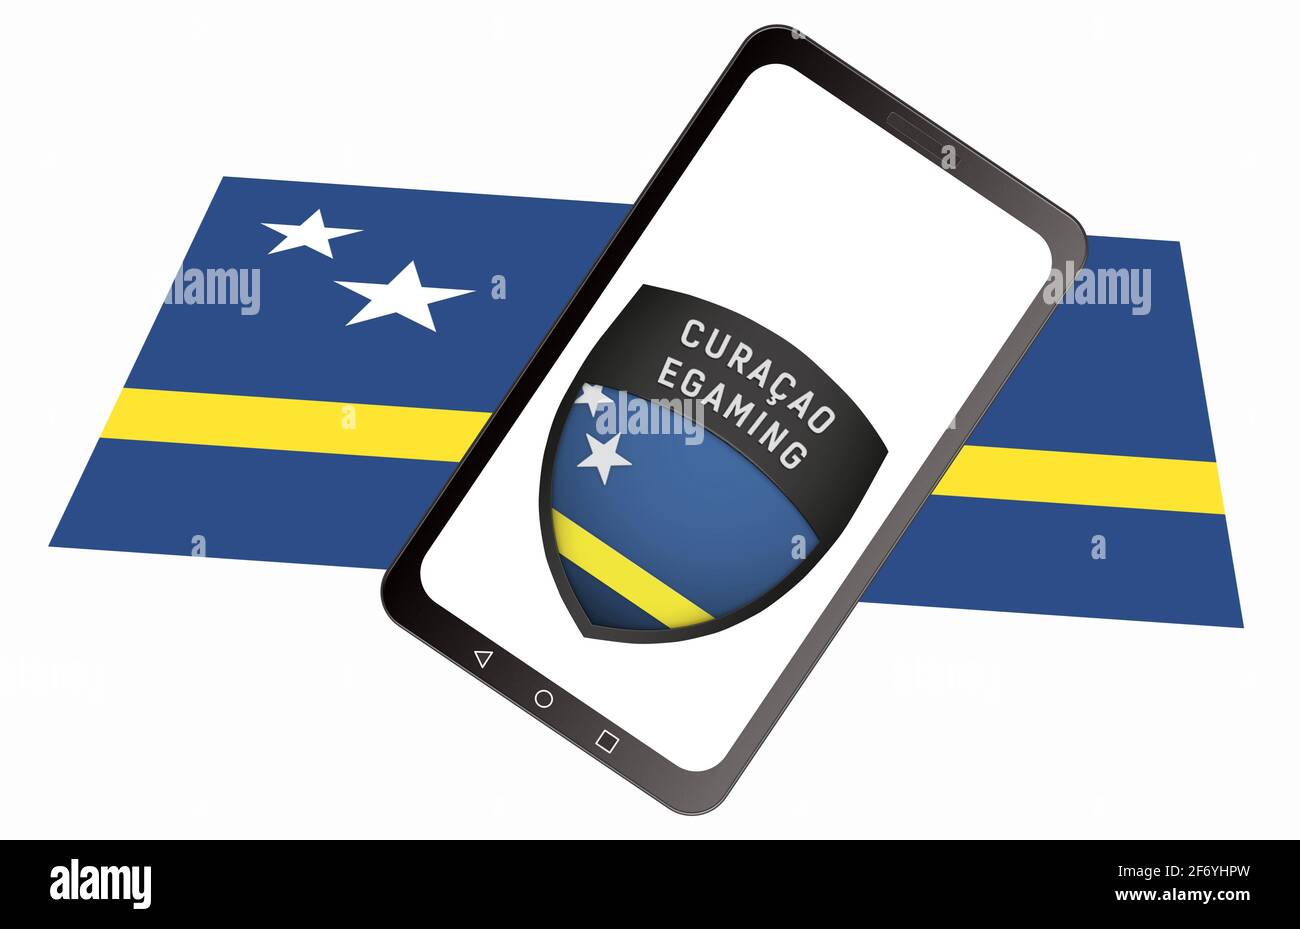 Germany, 25.03.2021: Curacao egaming logo lettering and flag on white background Stock Photo